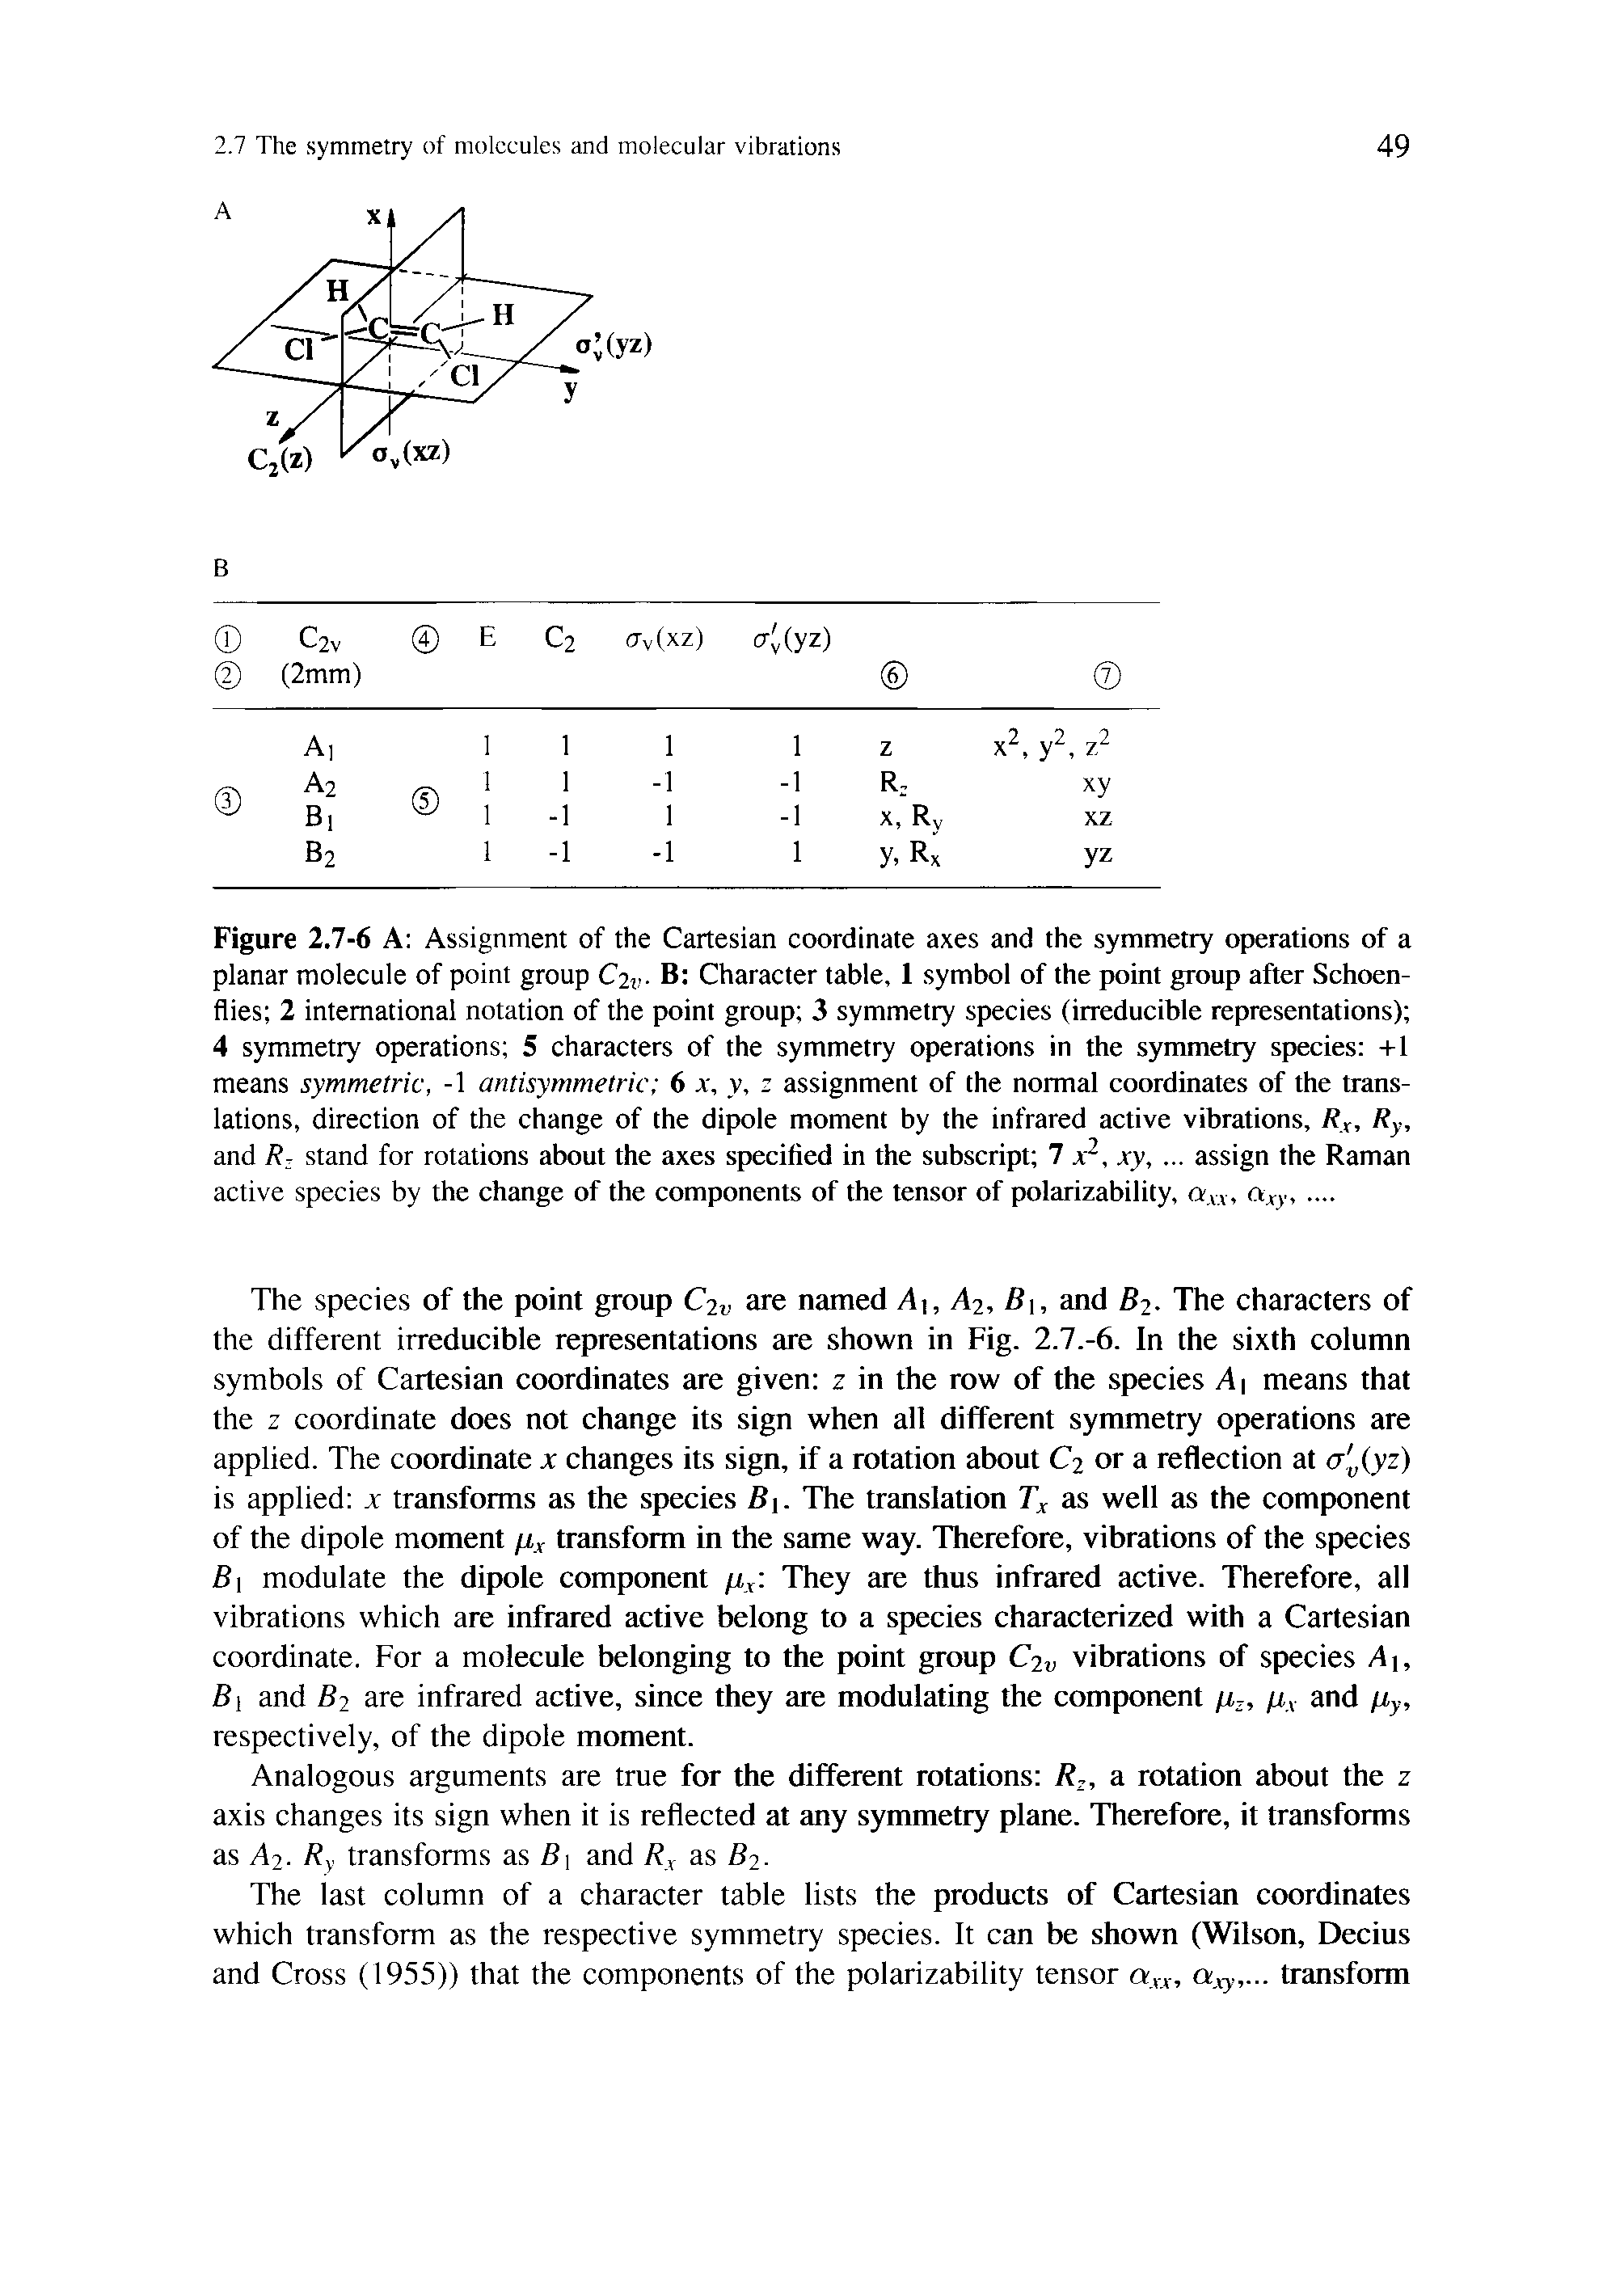 Figure 2.7-6 A Assignment of the Cartesian coordinate axes and the symmetry operations of a planar molecule of point group C2,.. B Character table, 1 symbol of the point group after Schoen-flies 2 international notation of the point group 3 symmetry species (irreducible representations) 4 symmetry operations 5 characters of the symmetry operations in the symmetry species +1 means symmetric, -1 antisymmetric 6 x, y, z assignment of the normal coordinates of the translations, direction of the change of the dipole moment by the infrared active vibrations, R, Ry, and R stand for rotations about the axes specified in the subscript 7 x, xy,. .. assign the Raman active species by the change of the components of the tensor of polarizability, aw, (Xxy,. ...